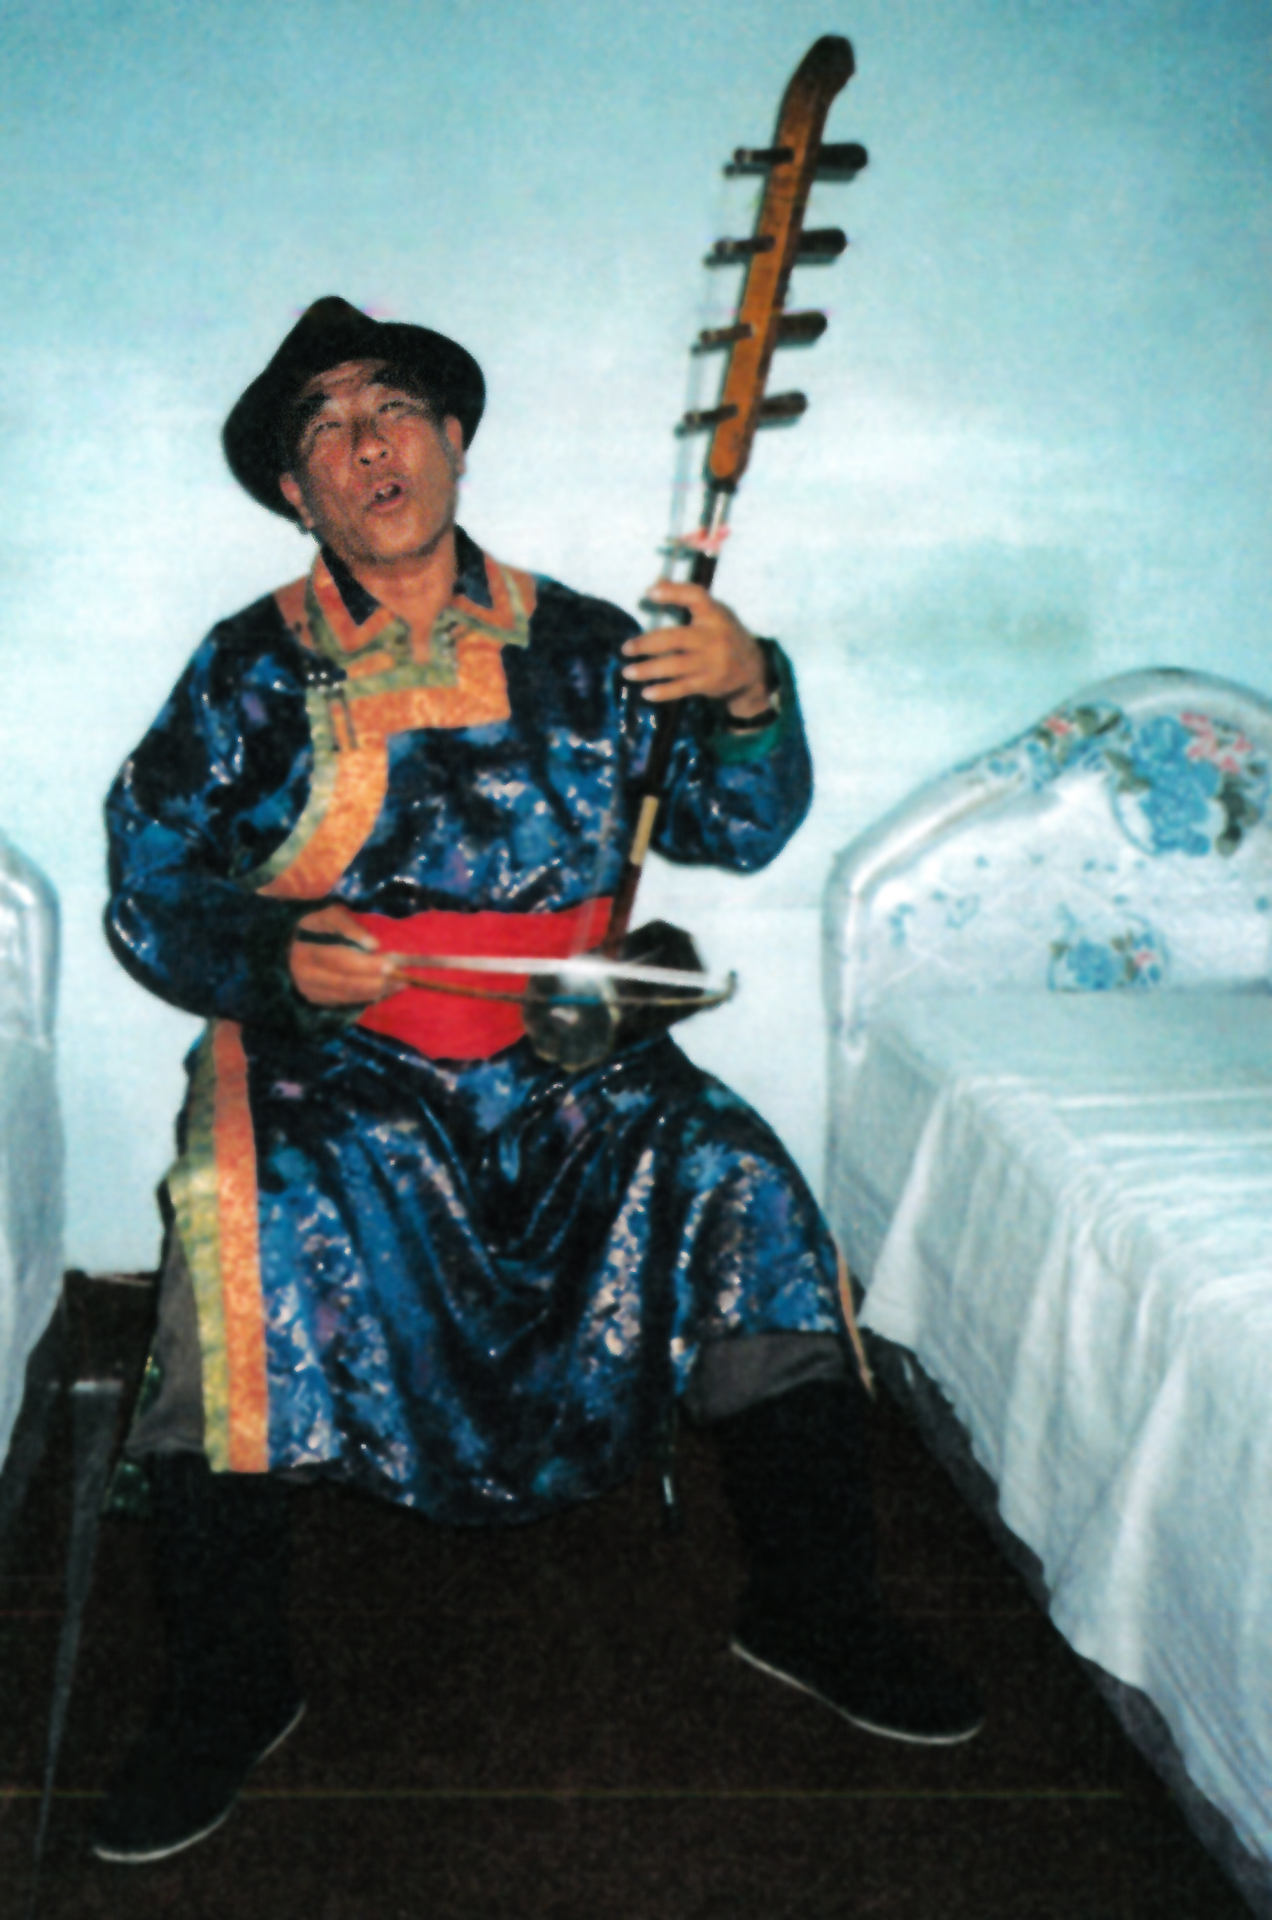 photo of the Mongolian bard Nimaodzer, singing and playing his instrument (a four-stringed fiddle) in his home in the 1980s or 1990s